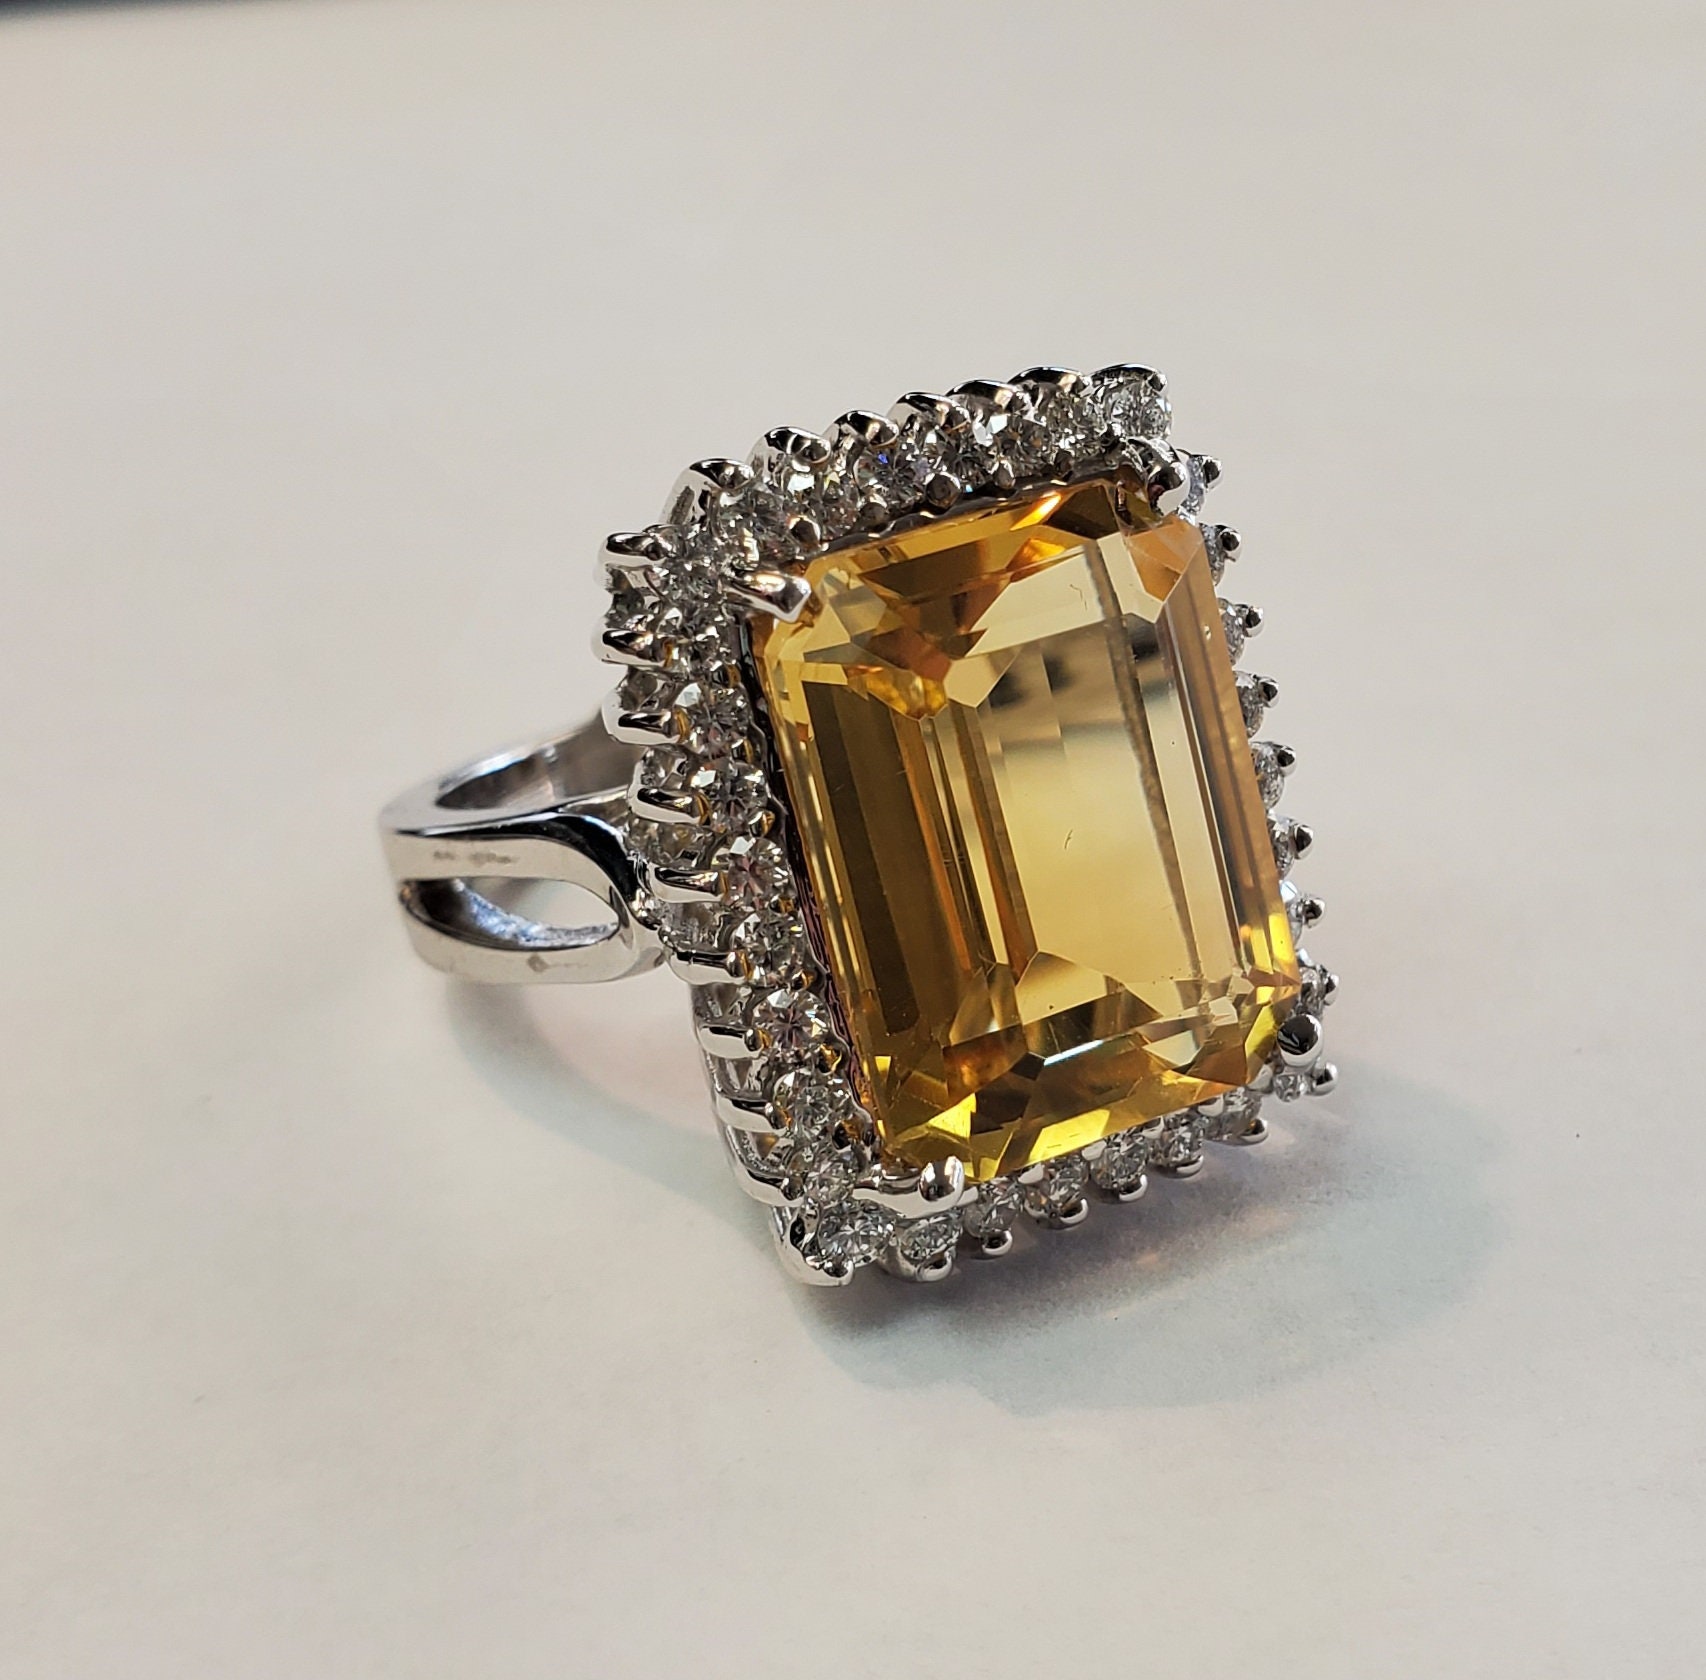 Product Image for 8.9ct step cut citrine and .90cttw diamond ring 18k white gold size 6.75 vpl